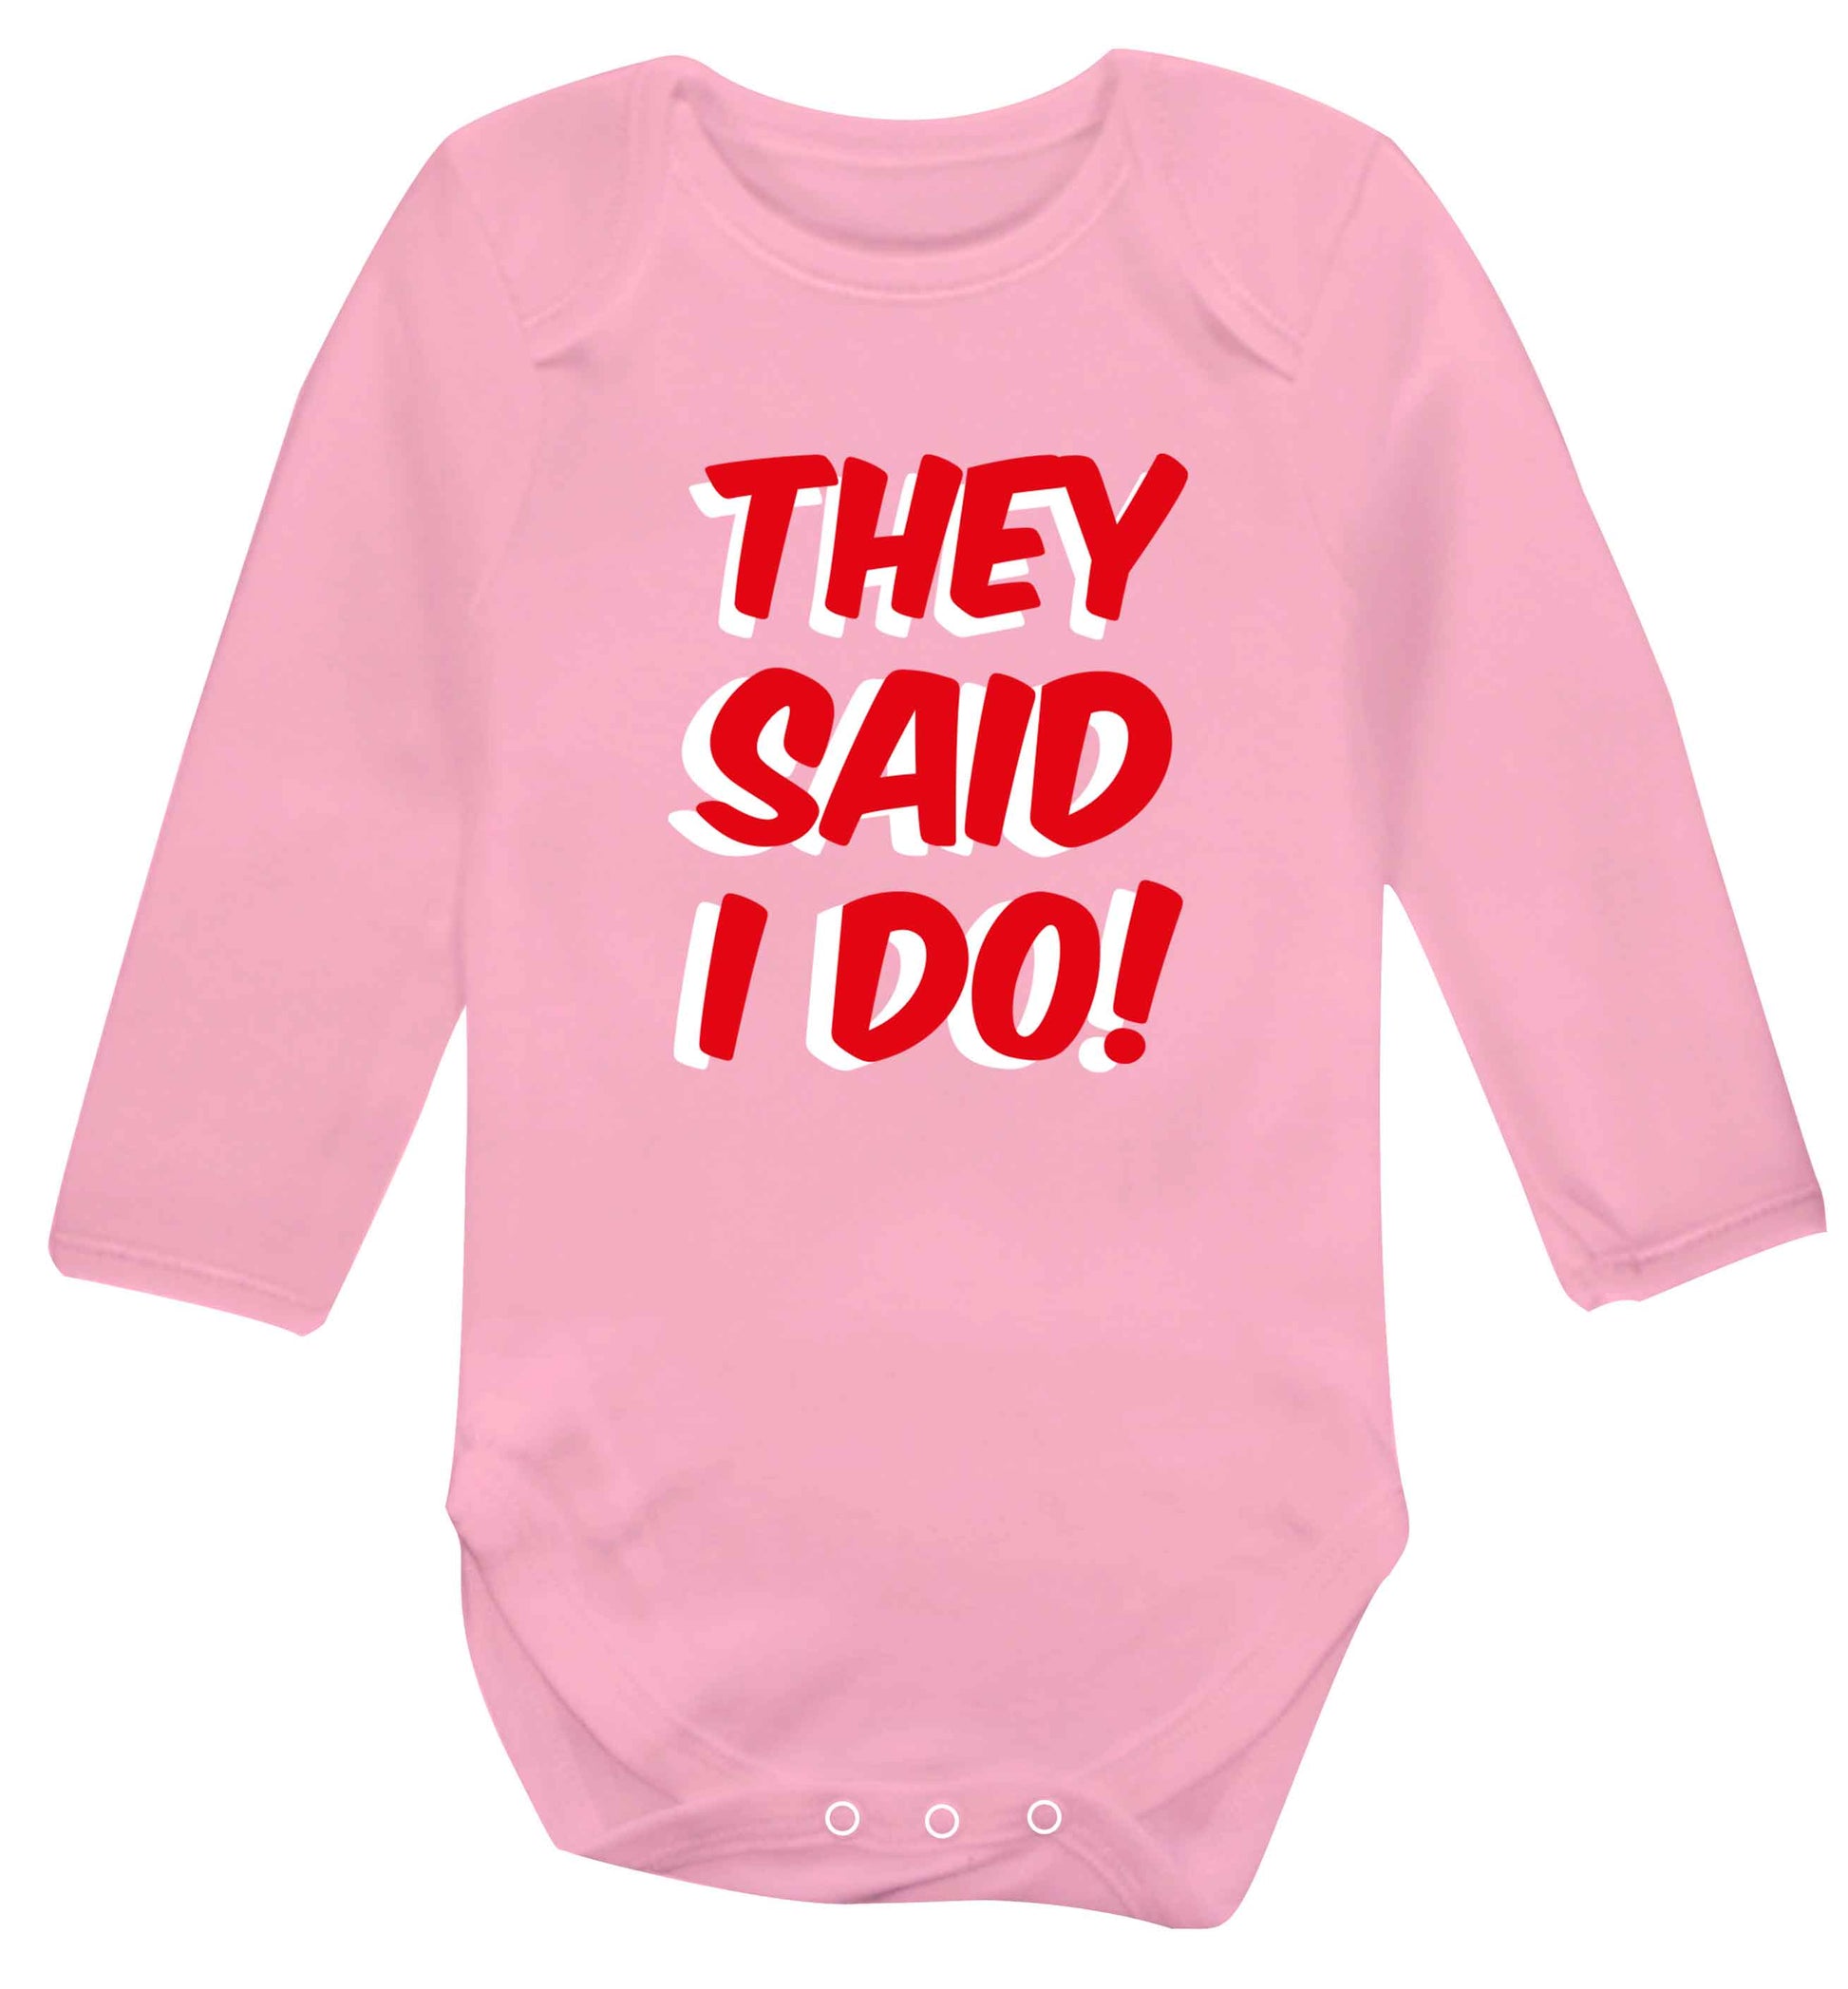 They said I do baby vest long sleeved pale pink 6-12 months